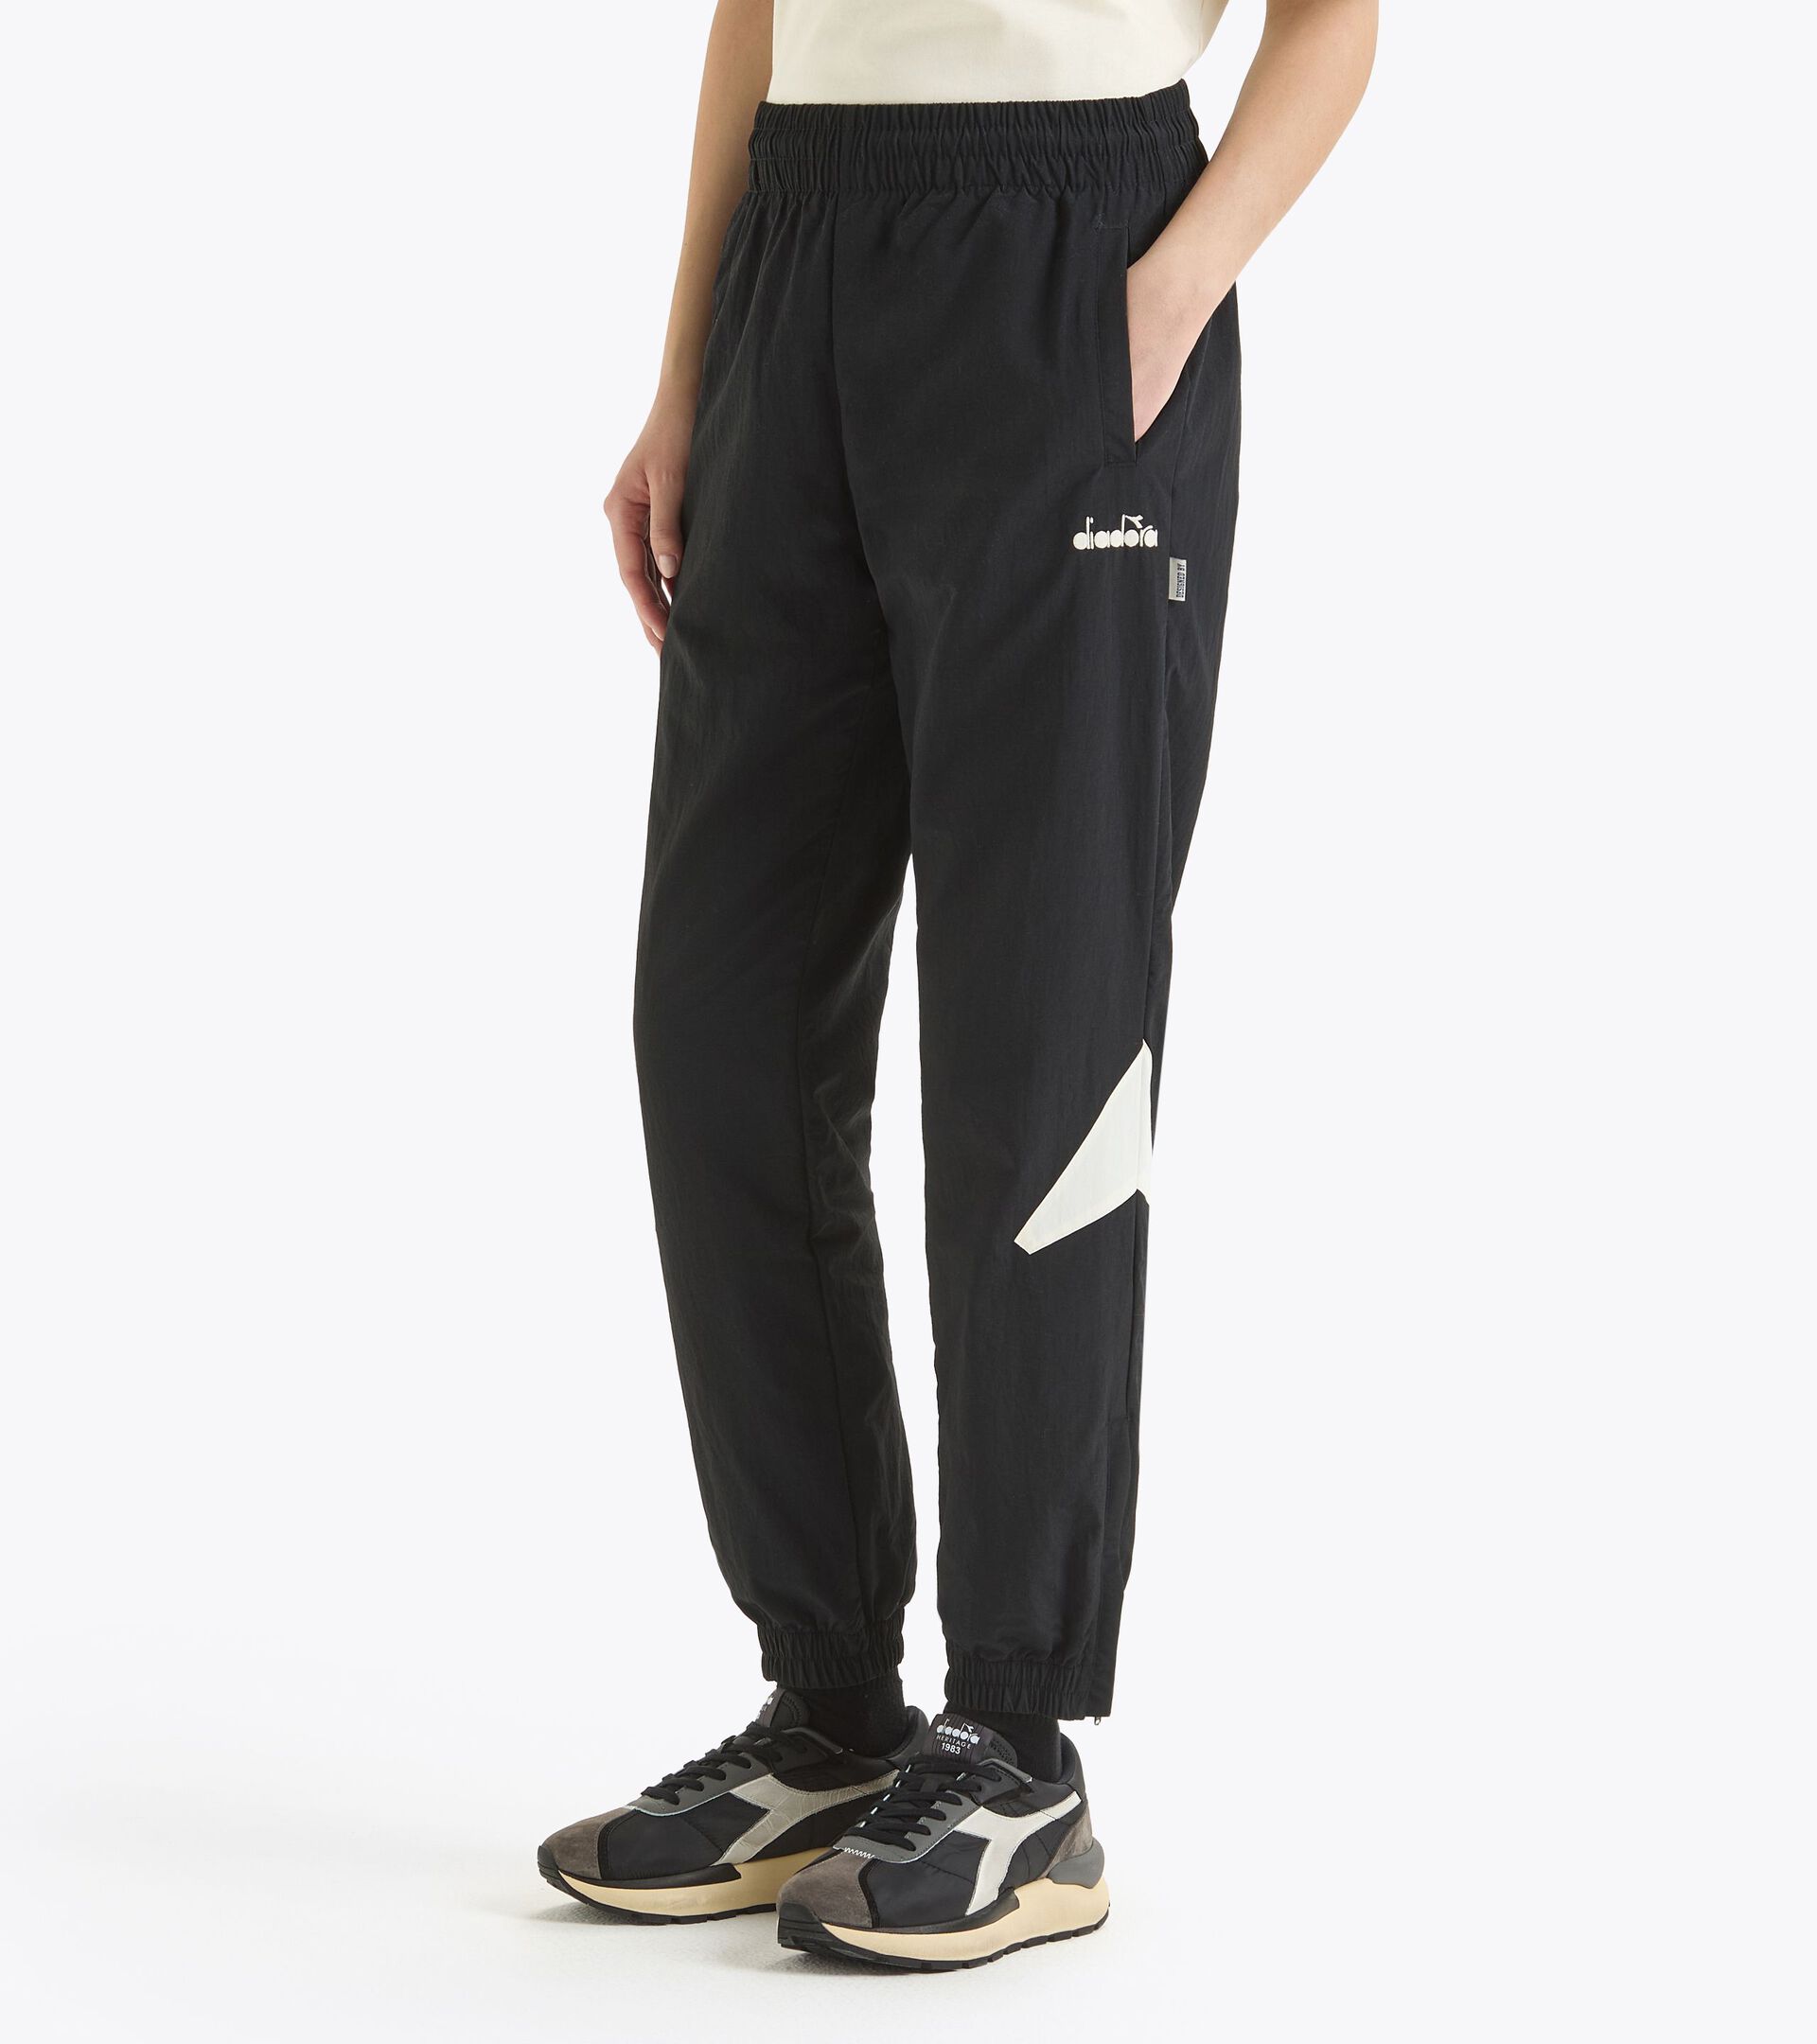 Track pants - Made in italy - Gender Neutral
 TRACK PANTS LEGACY BLACK - Diadora